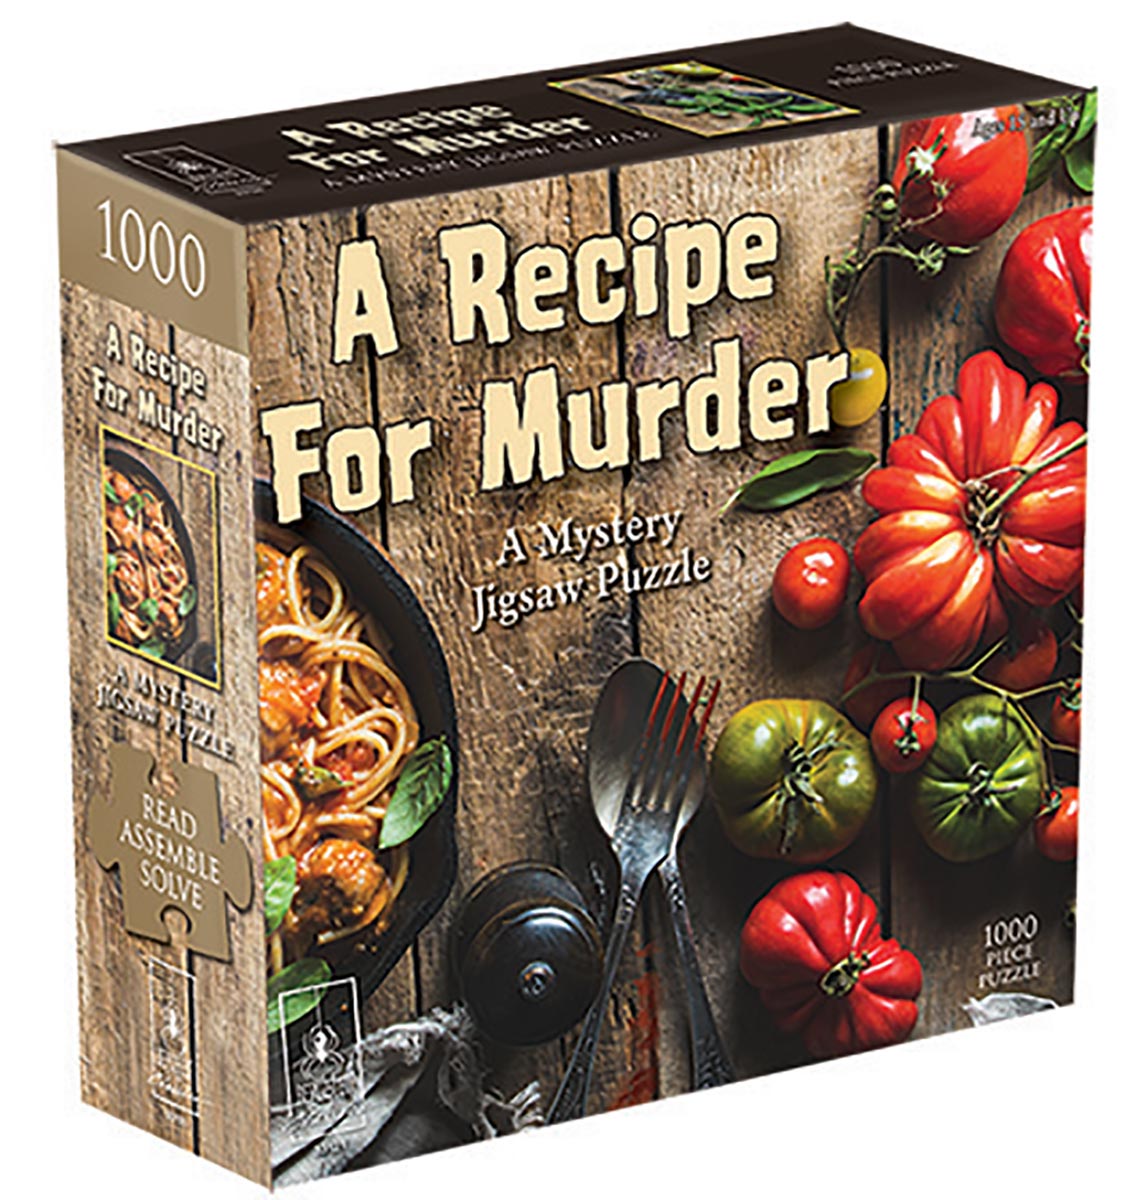 A Recipe For Murder: A Mystery (1000 pc puzzle)